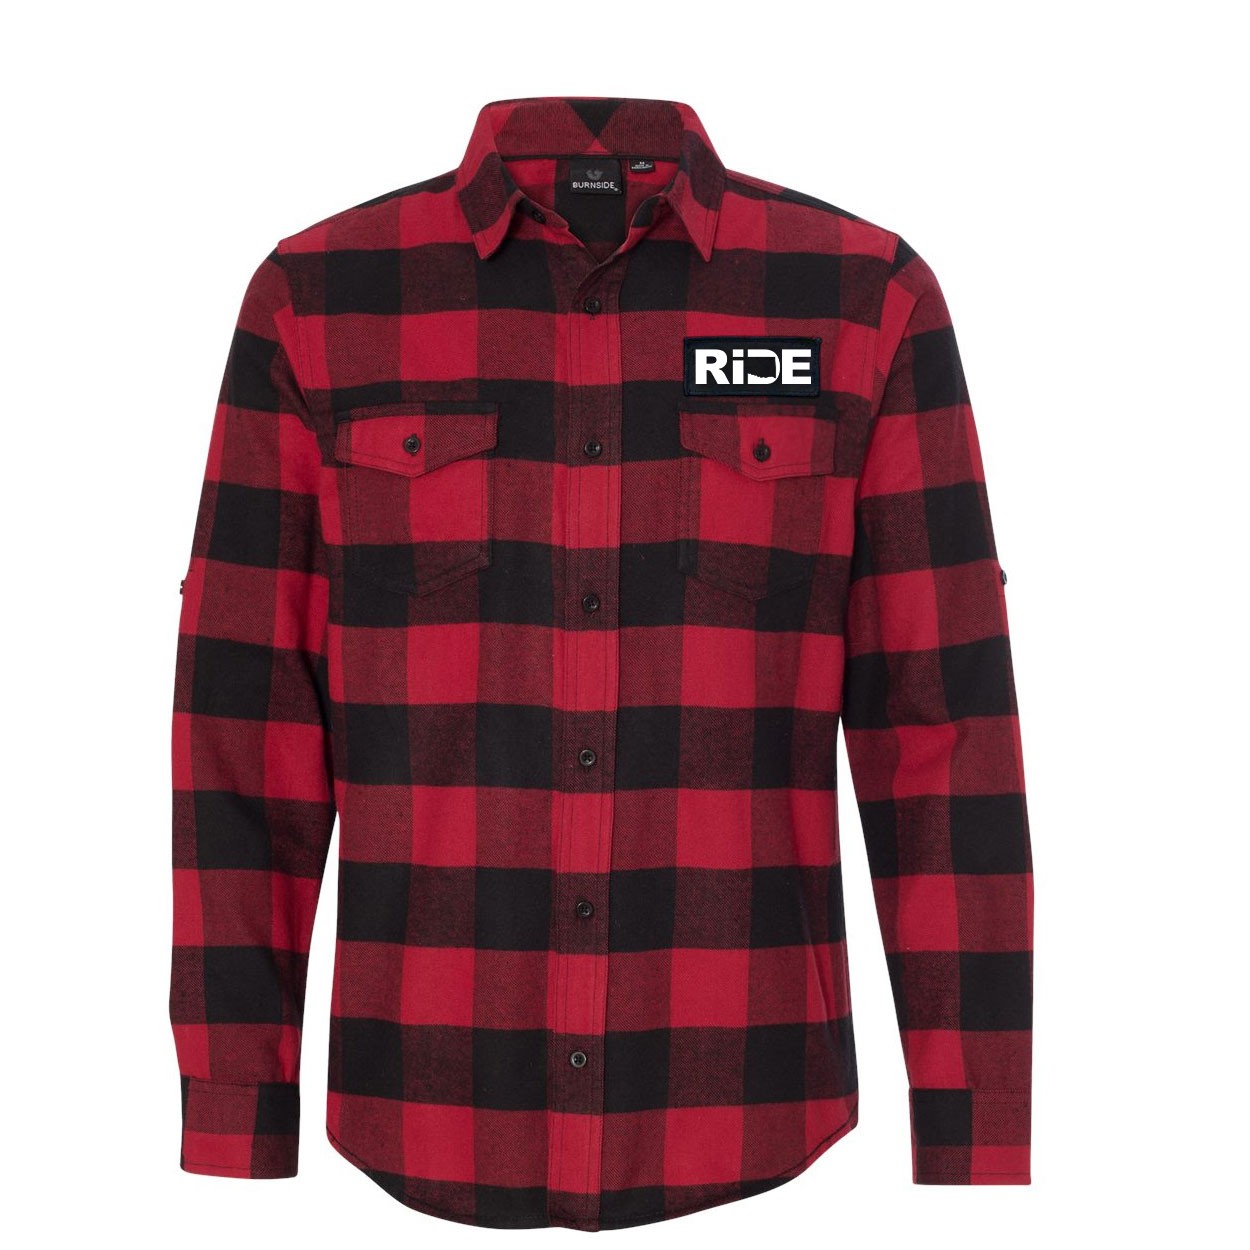 Ride Oklahoma Classic Unisex Long Sleeve Woven Patch Flannel Shirt Red/Black Buffalo (White Logo)